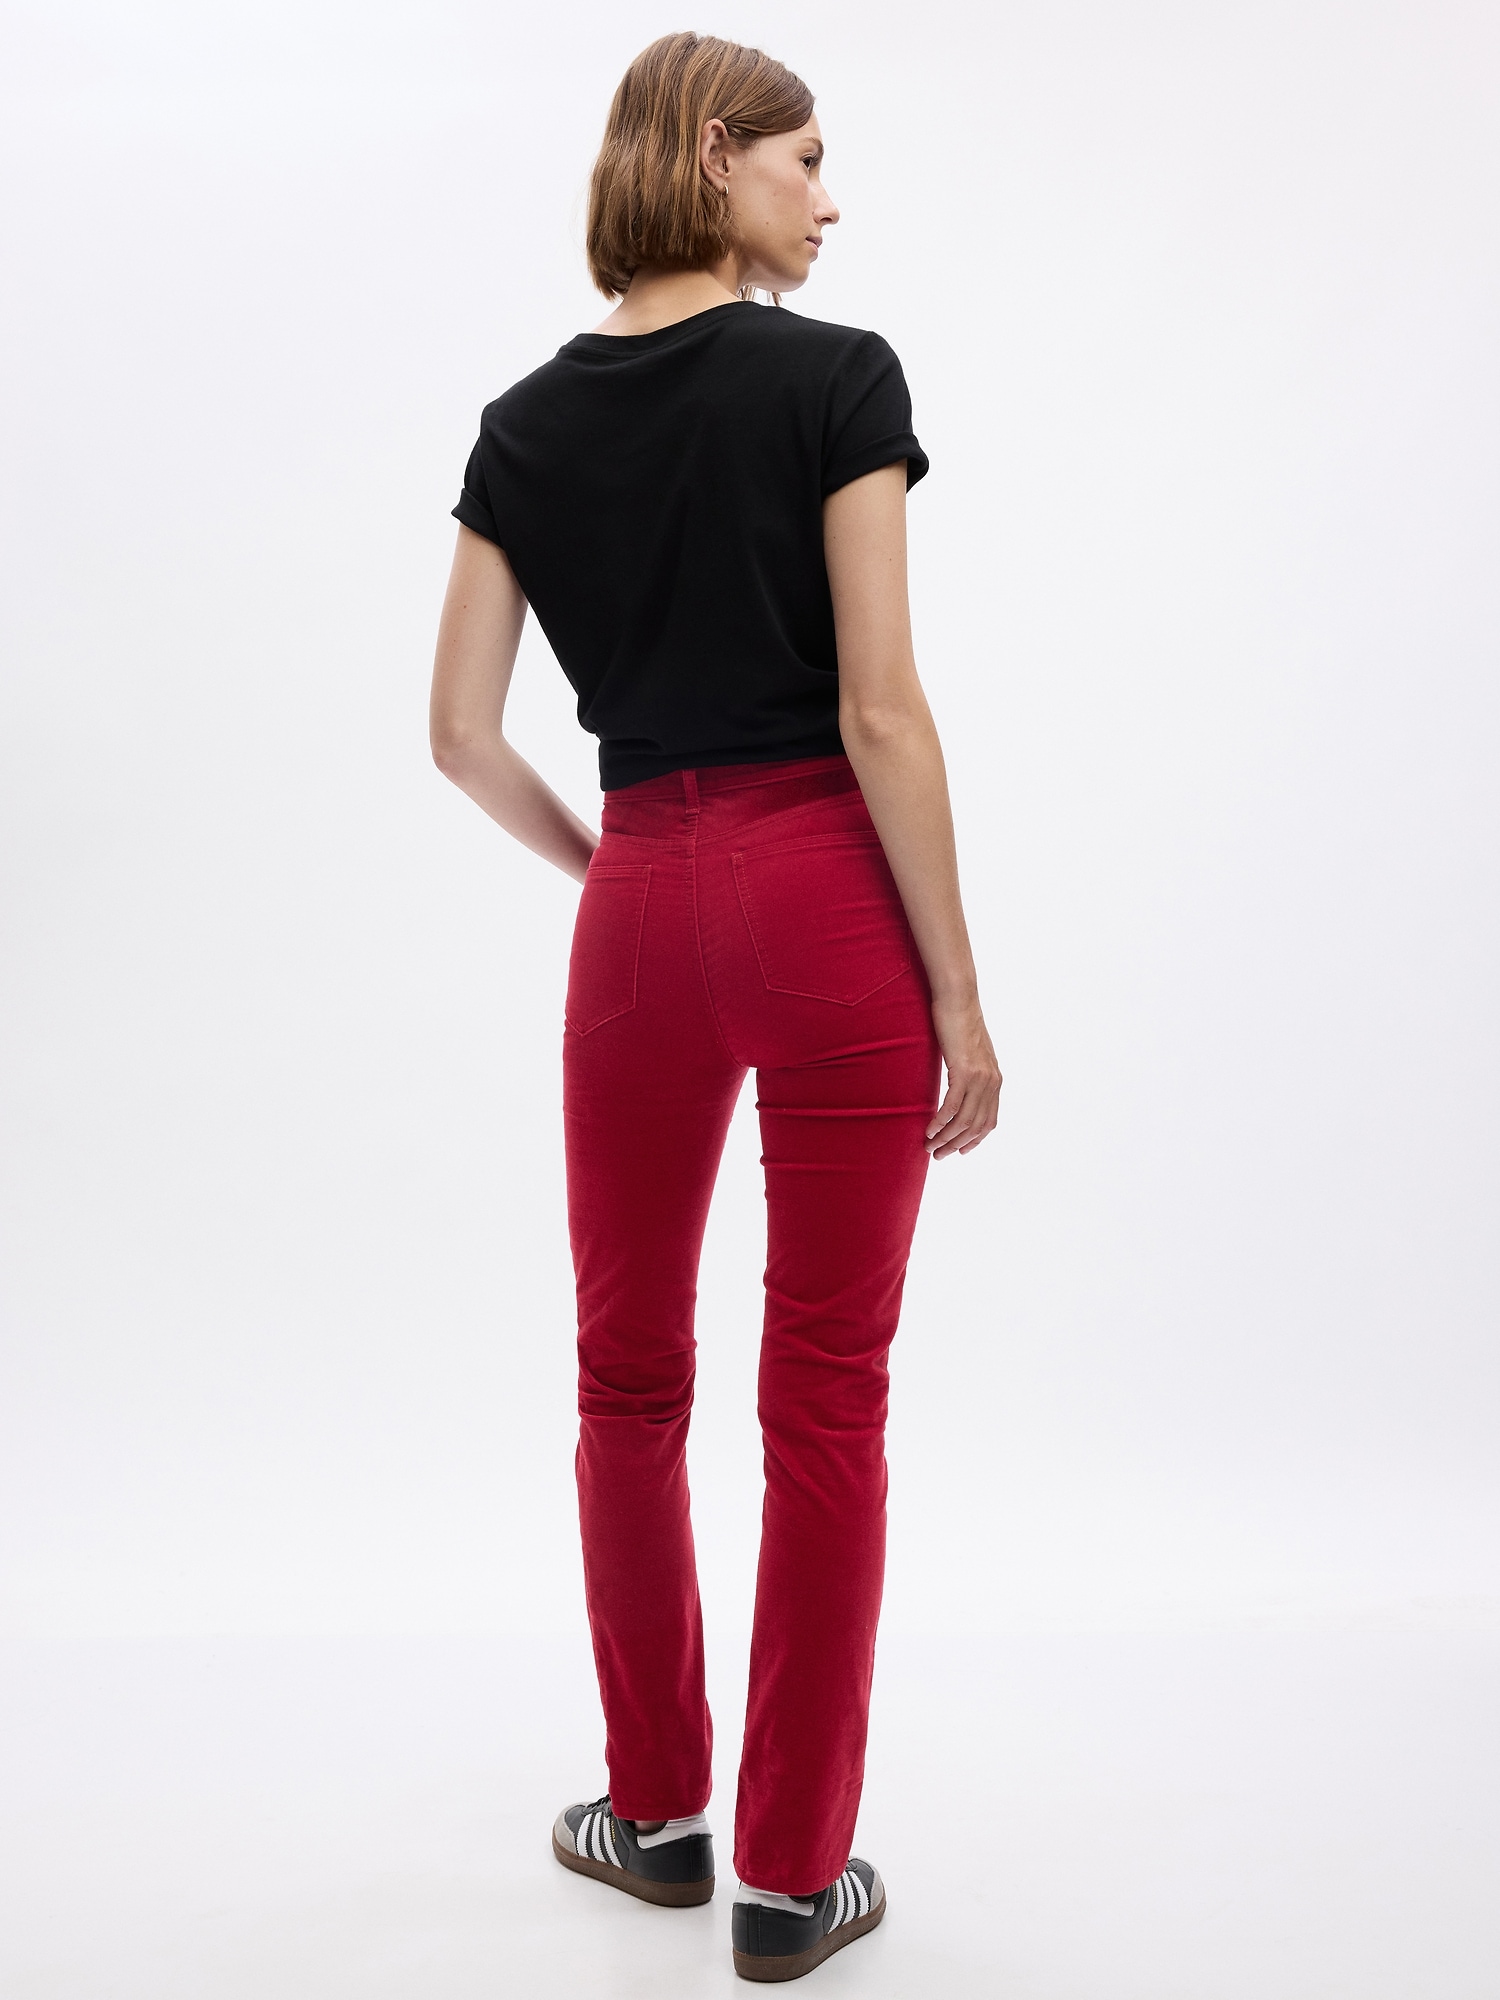 Womens High Waist Casual Fashion Trousers Velvet Slim Fit Long Flare Pants  Size